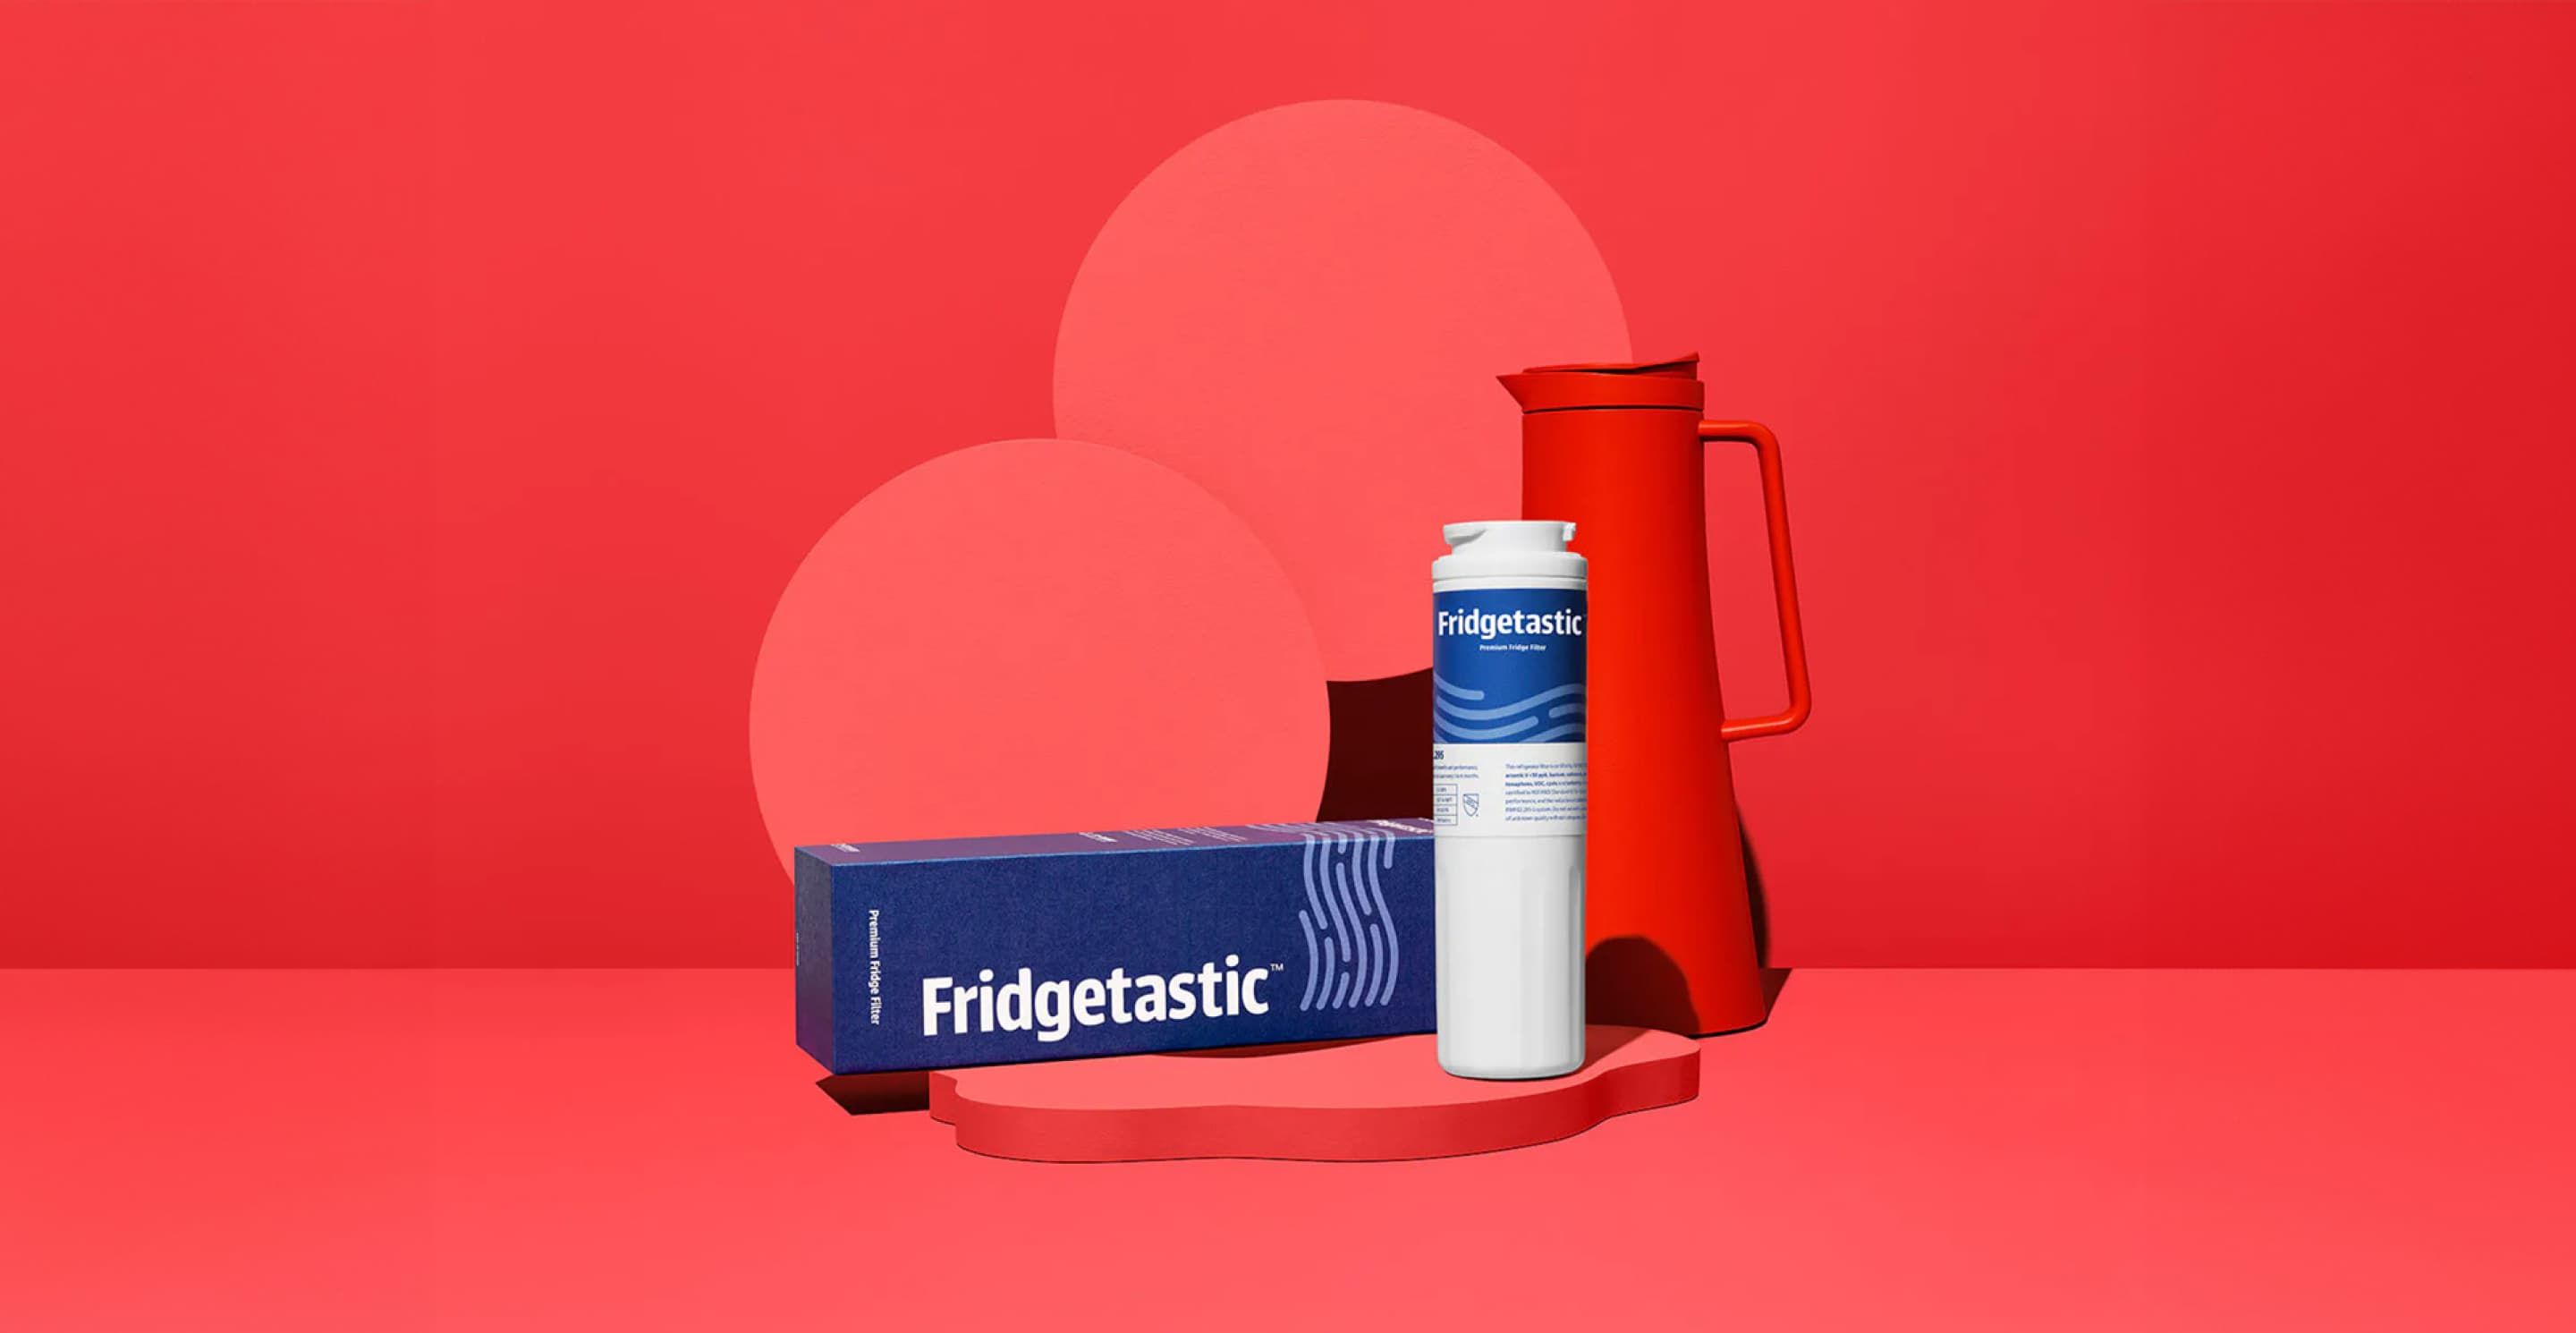 FilterEasy’s Fridgetastic box and filter are shown on a short pedestal with a red water bottle behind them.